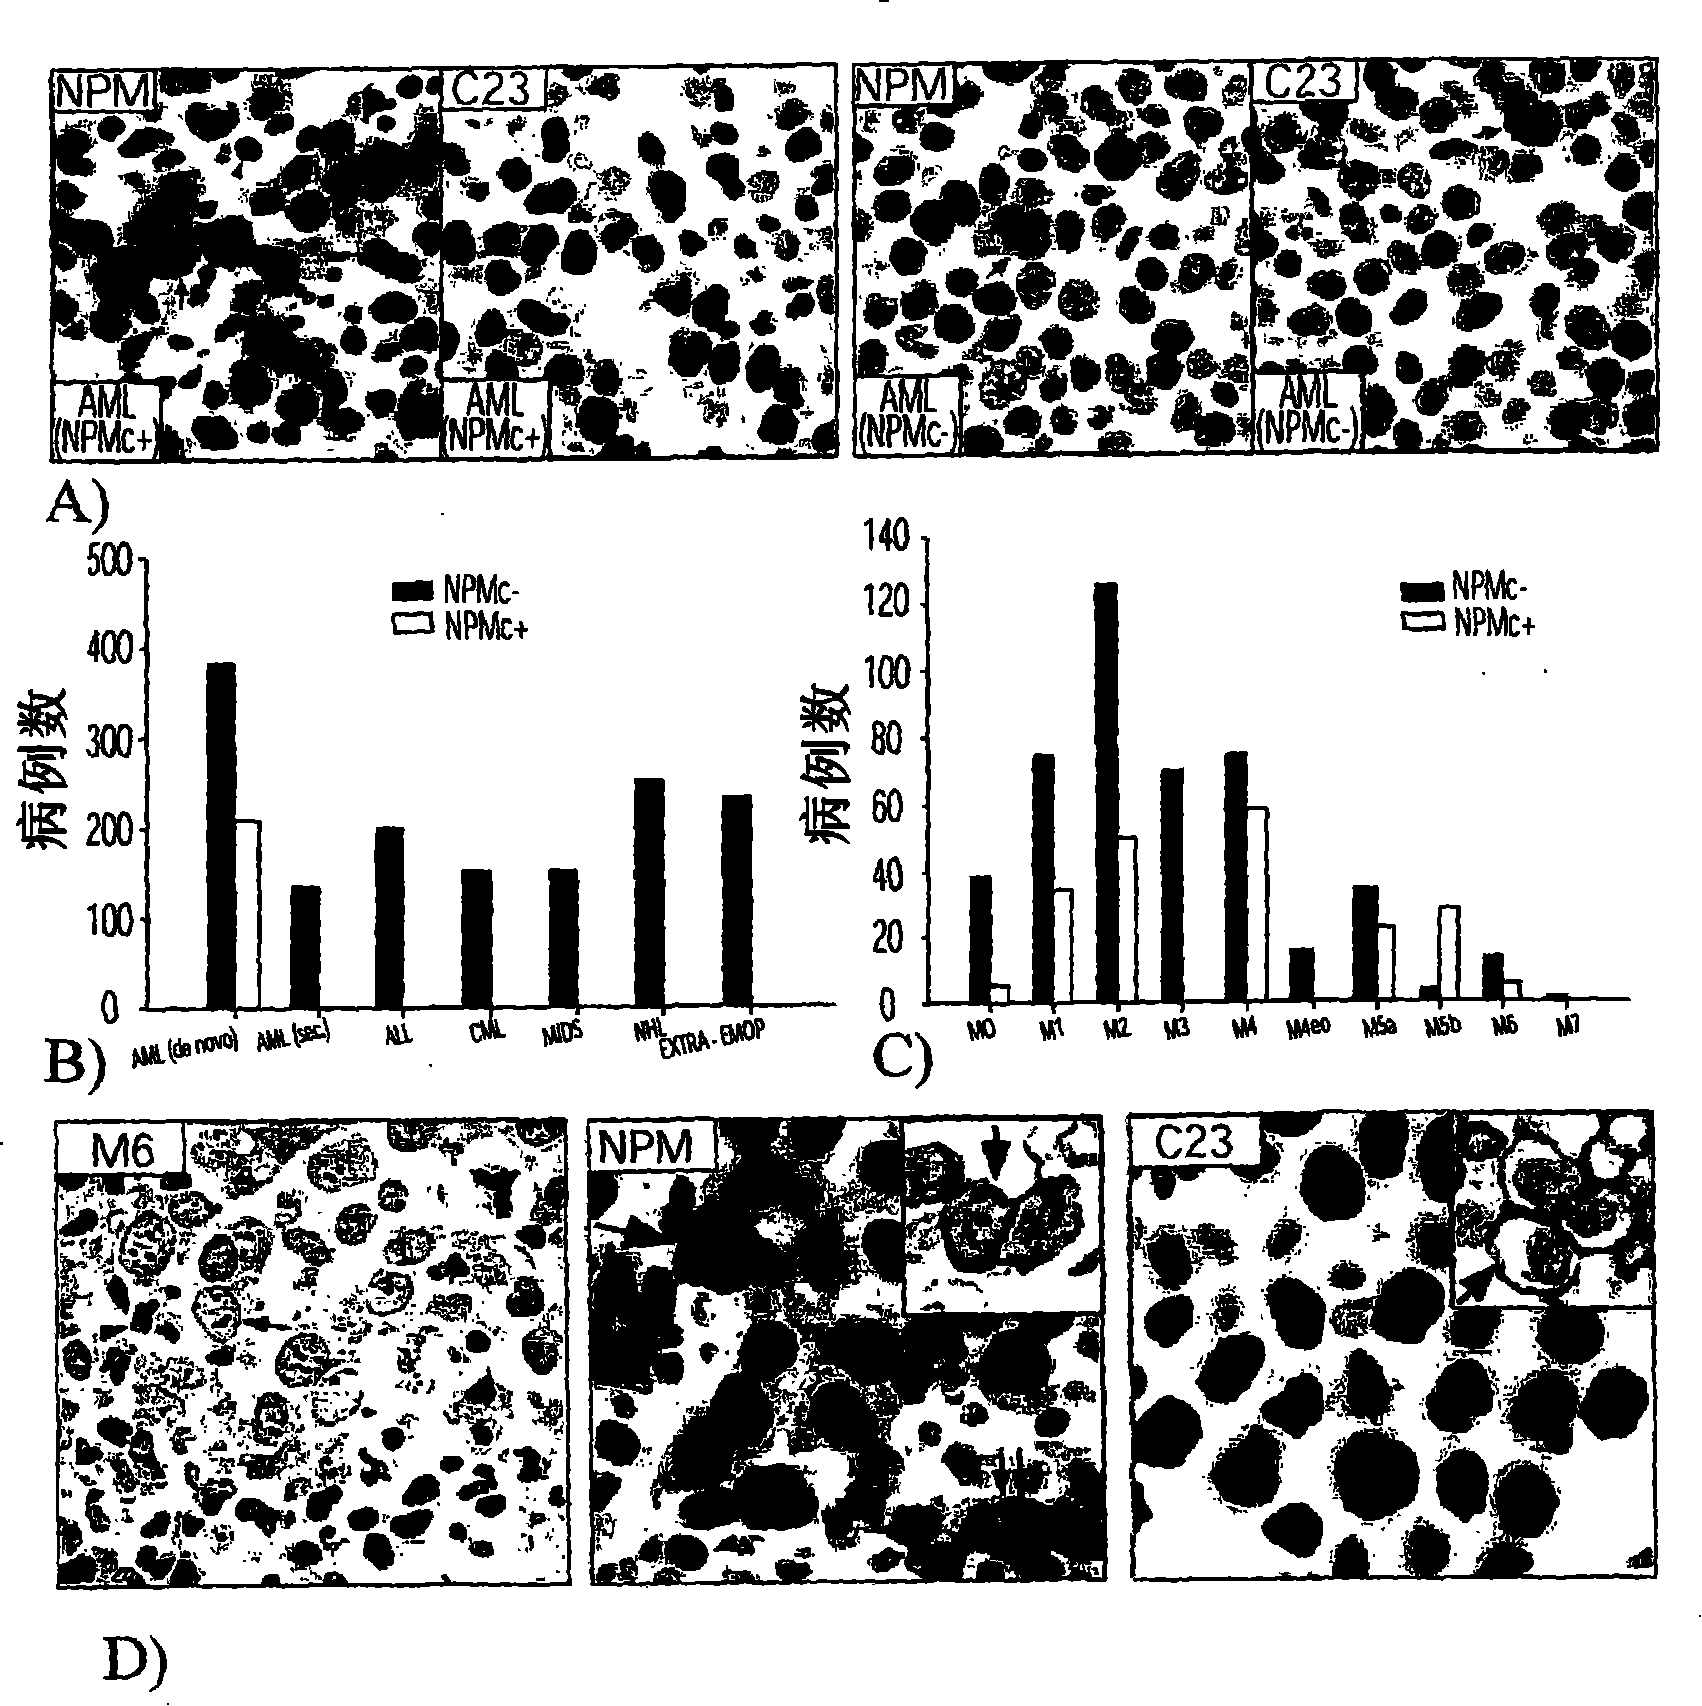 Nucleophosmin protein (npm) mutants, corresponding gene sequences and uses thereof